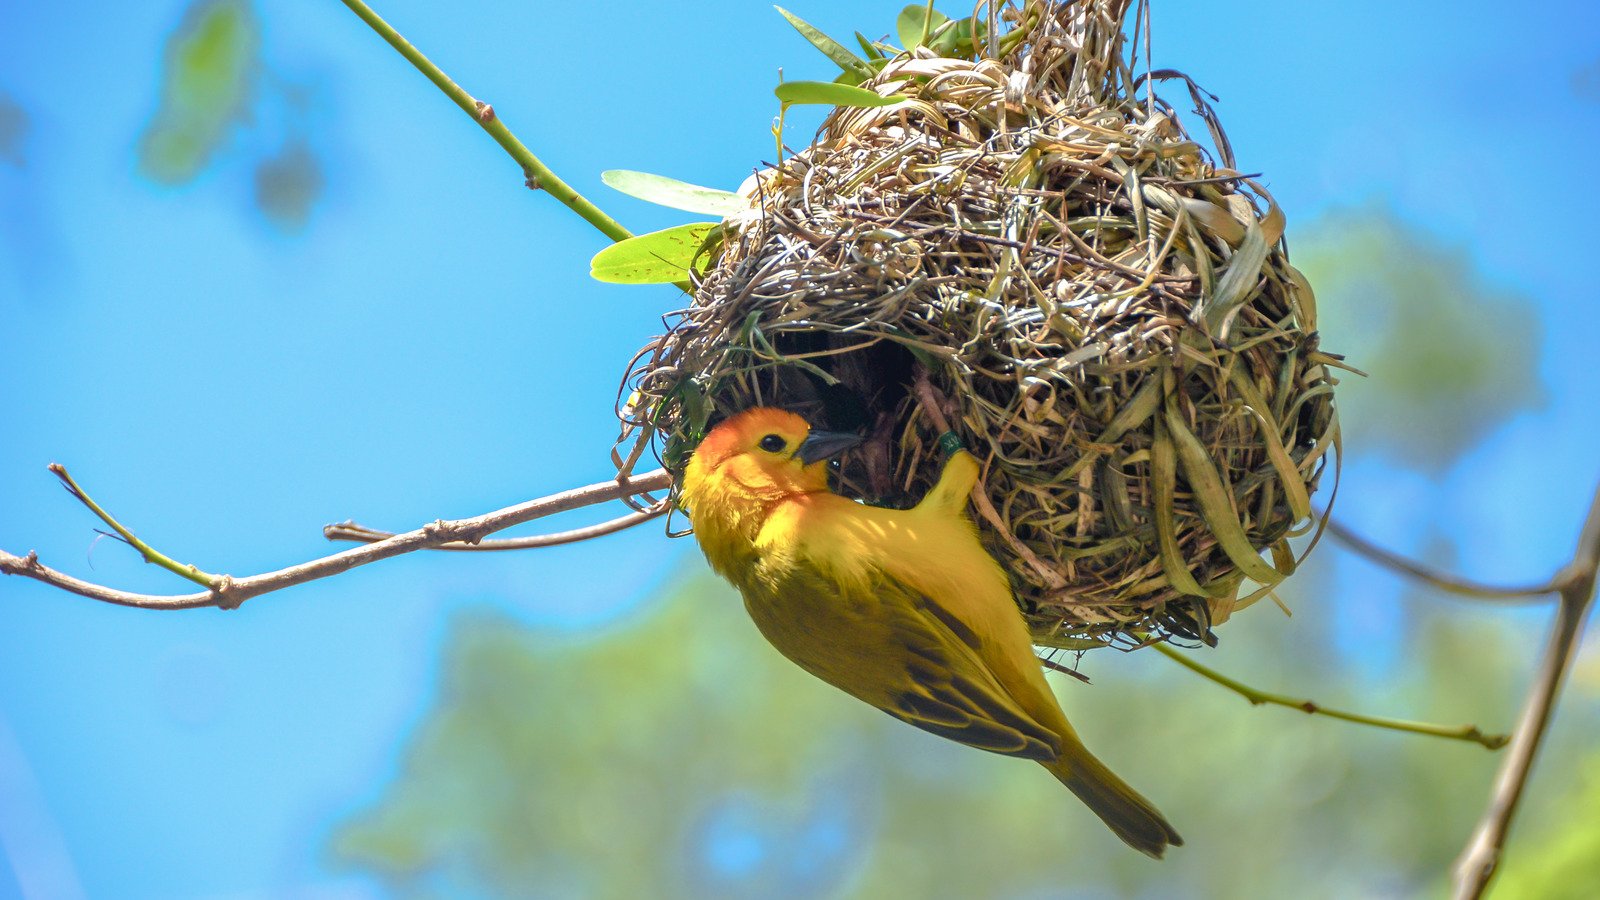 The Best Nest Materials To Leave Out For Birds